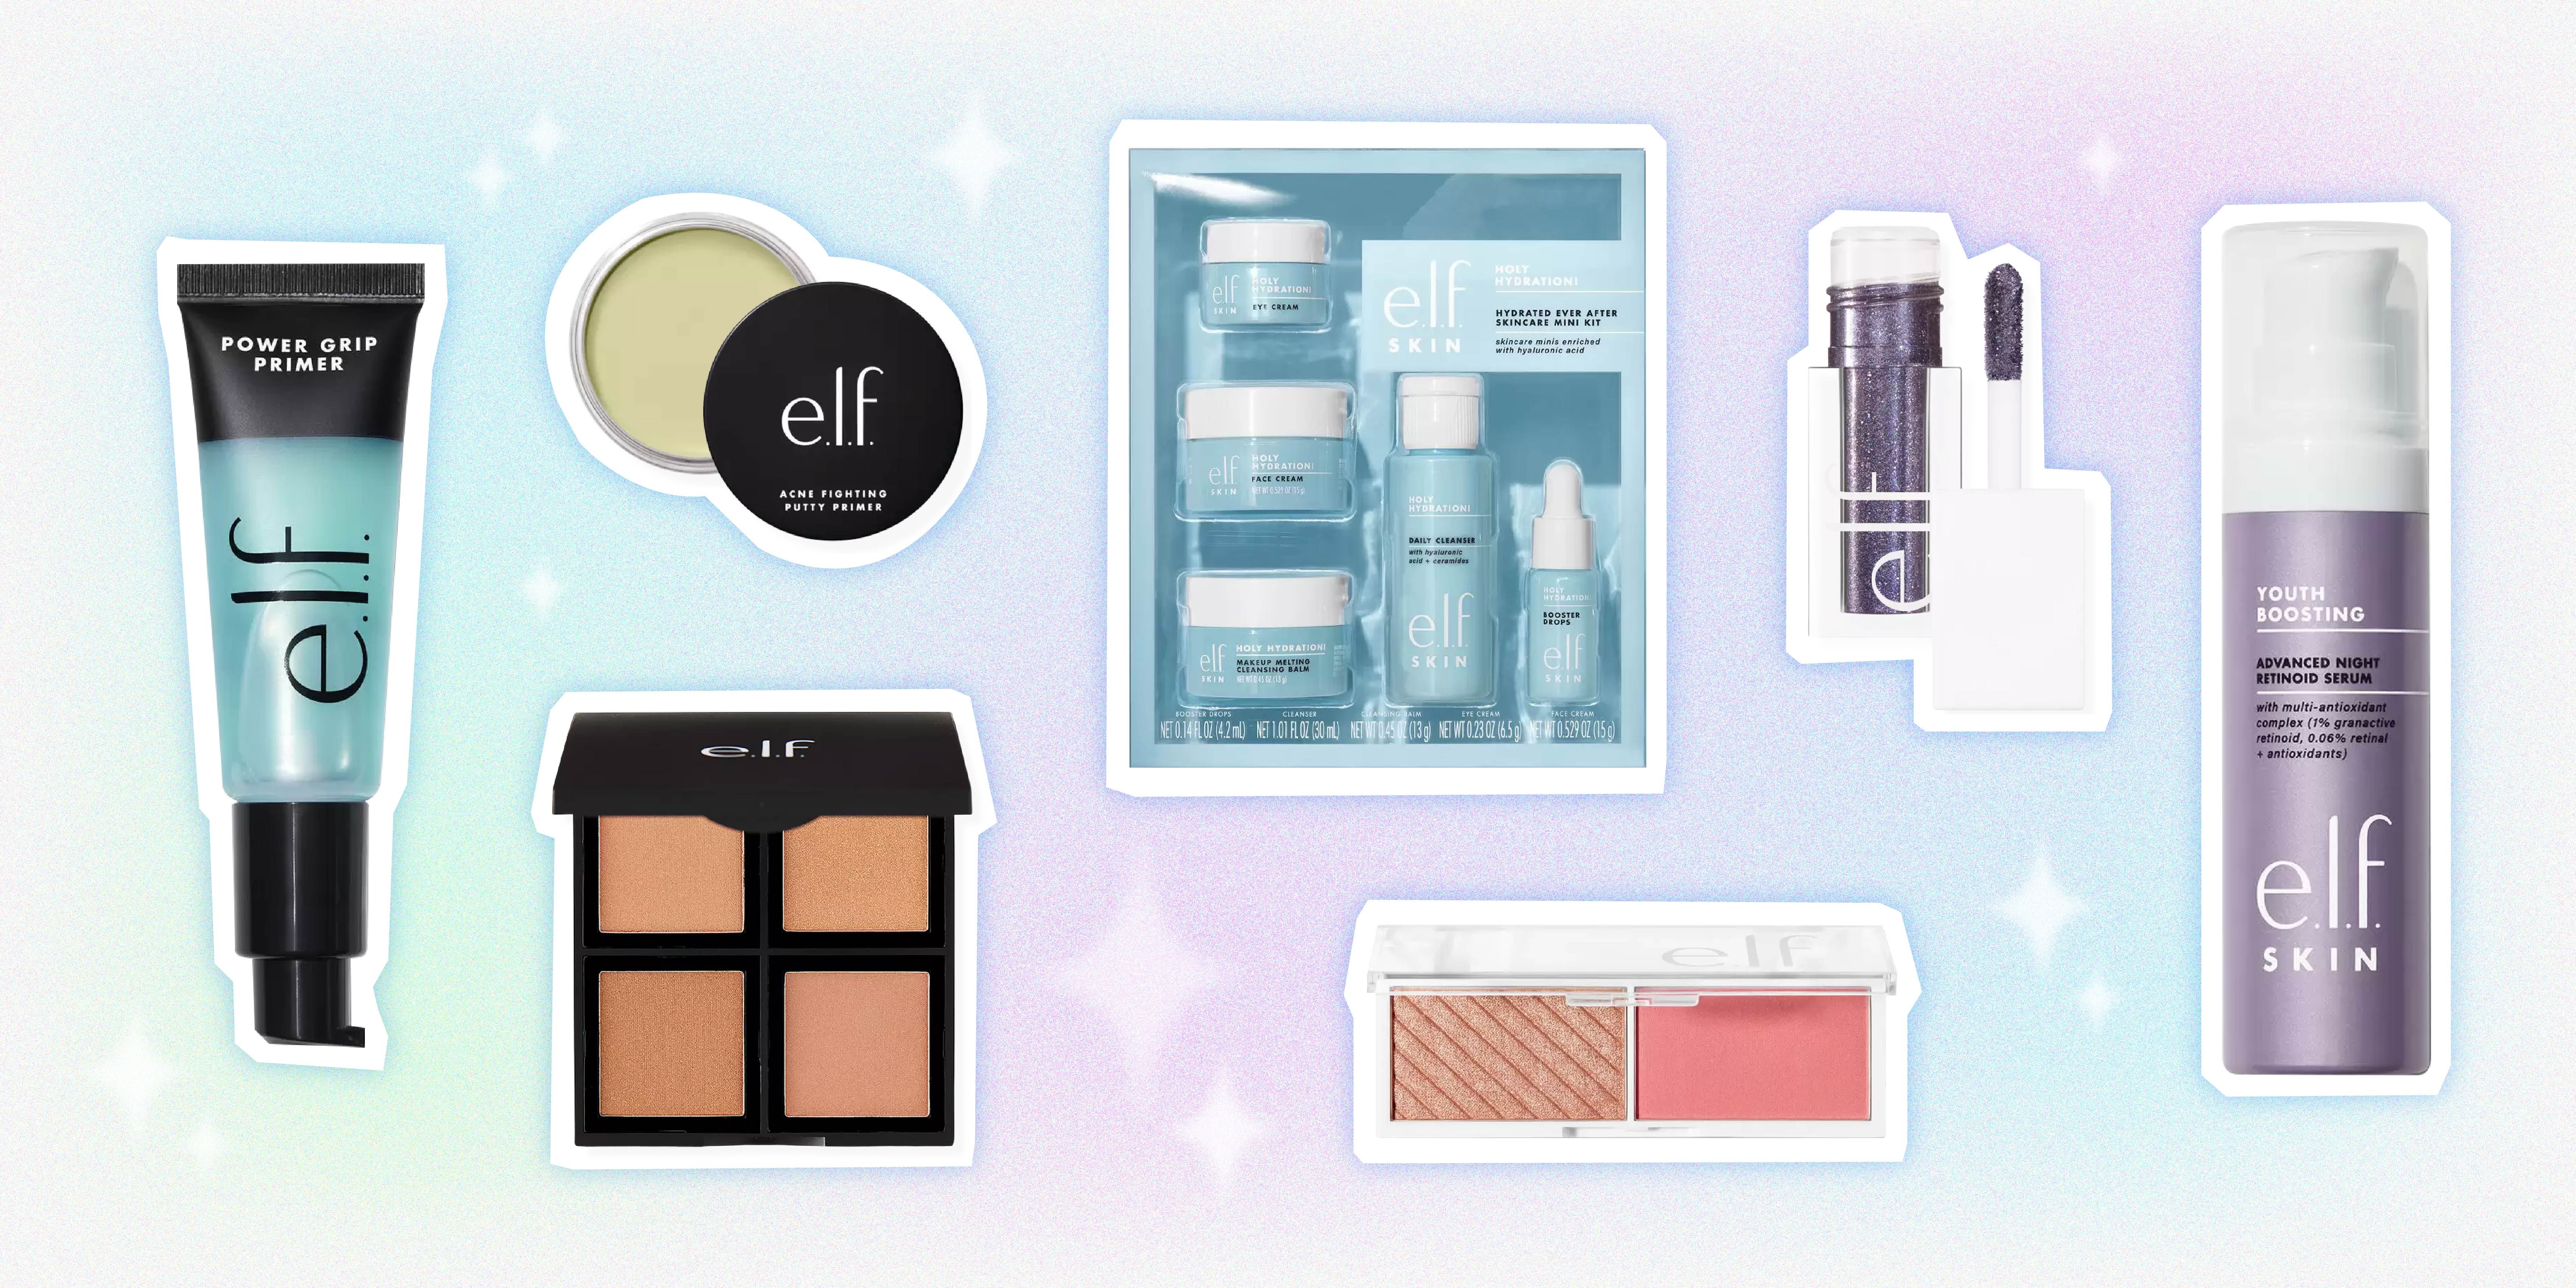 Shop For Genuine e.l.f. Cosmetics Products At Best Price Online